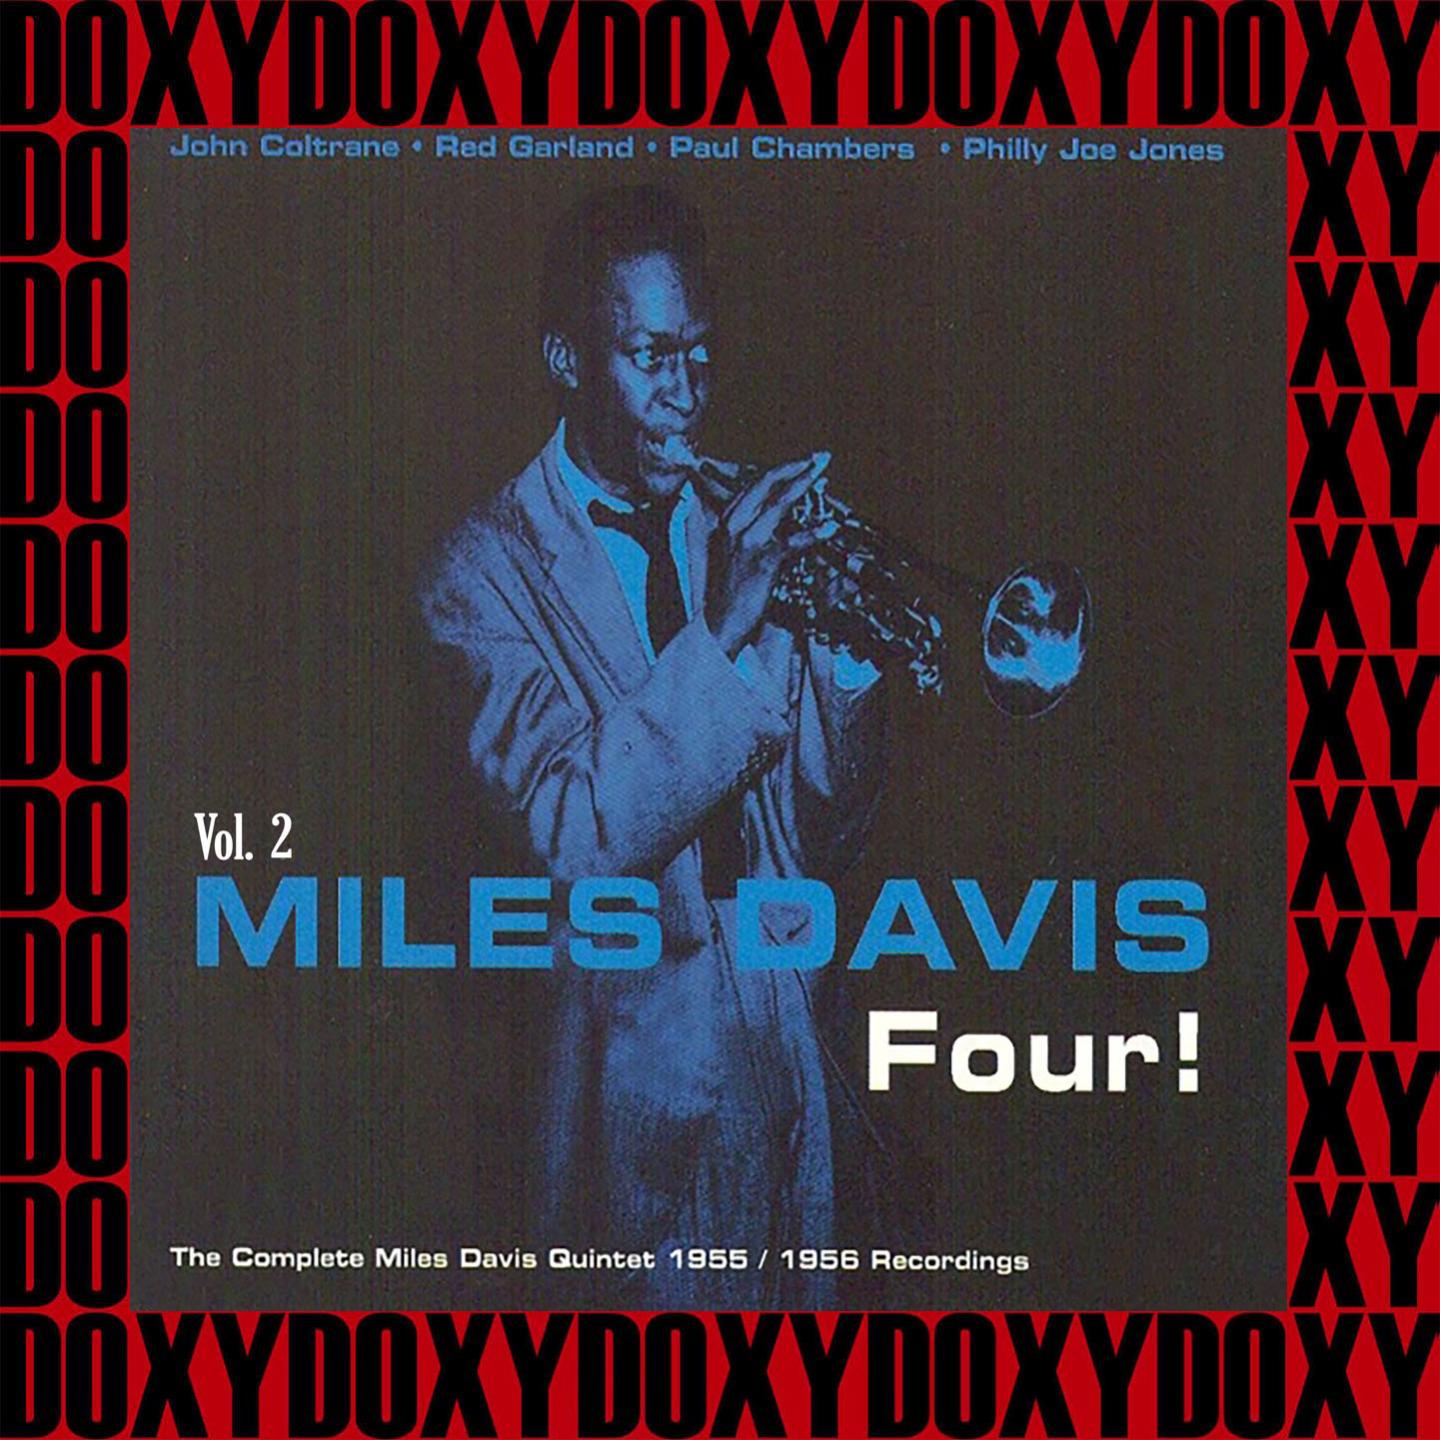 Four! The Complete Miles Davis Quintet 1955-1956 Recordings, Vol. 2 (Hd Remastered Edition, Doxy Col专辑